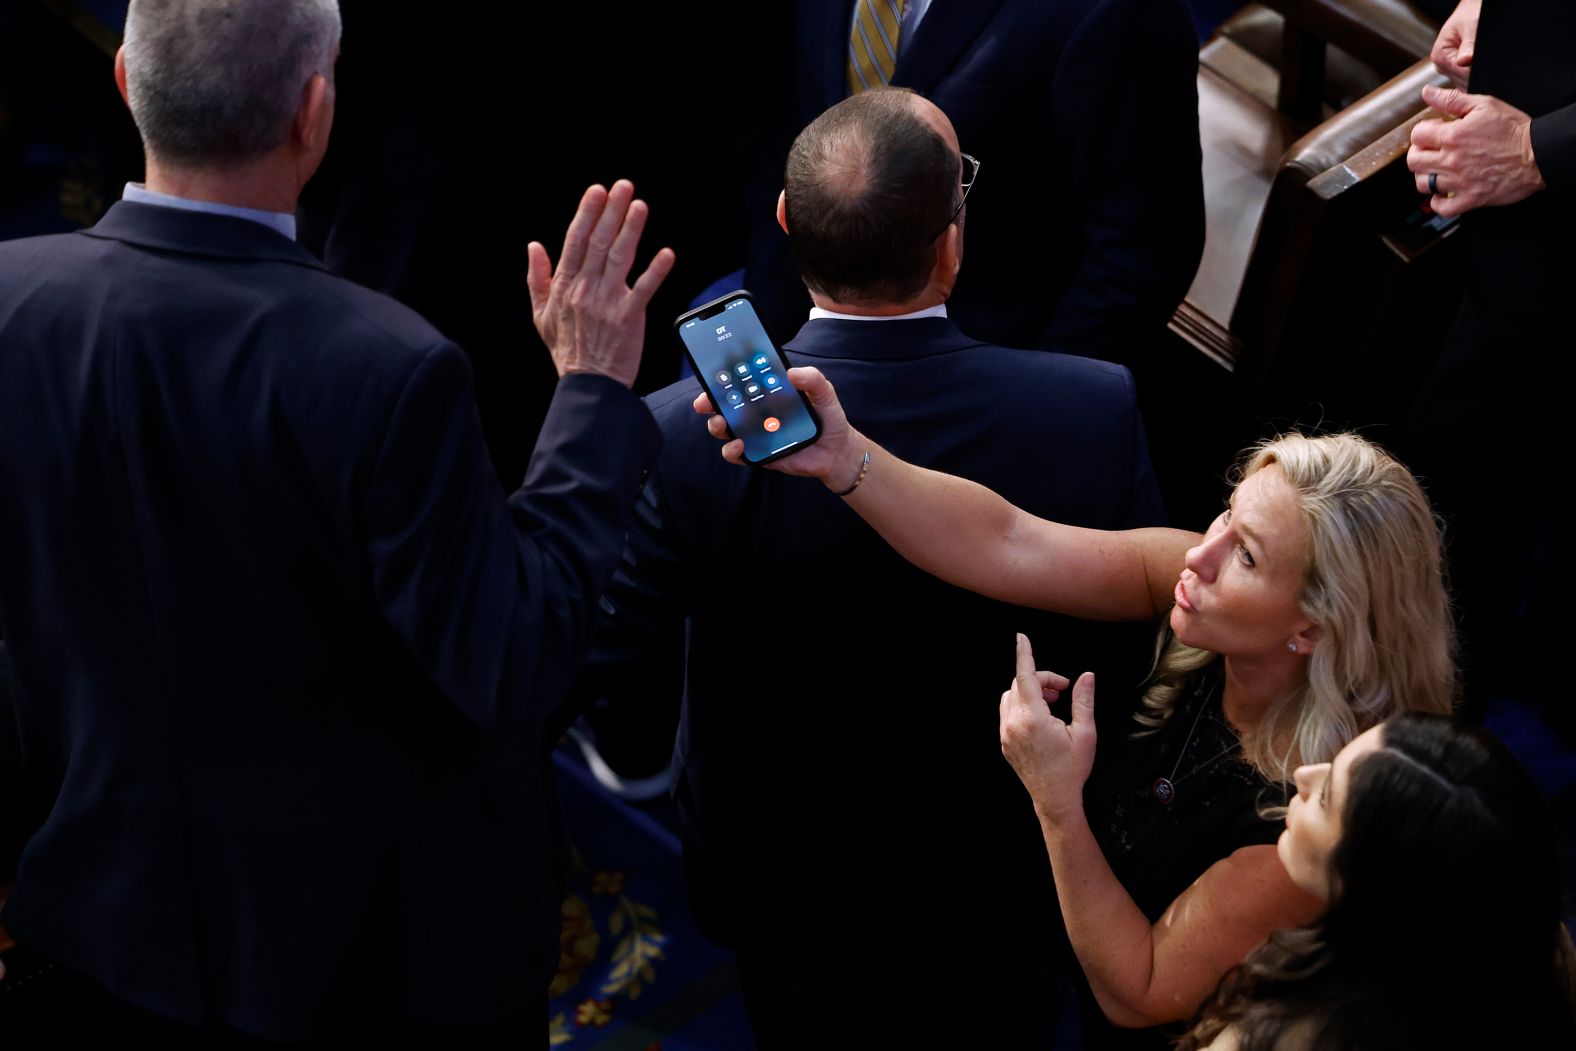 US Rep. Marjorie Taylor Greene tries to hand a phone to Rep. Matt Rosendale during the frantic final House speakership votes on Saturday, January 7. The "DT" on the phone <a href="index.php?page=&url=https%3A%2F%2Fwww.cnn.com%2Fvideos%2Fpolitics%2F2023%2F01%2F09%2Fmarjorie-taylor-greene-trump-call-kevin-mccarthy-speaker-vote-ip-vpx.cnn" target="_blank">was former President Donald Trump</a>.